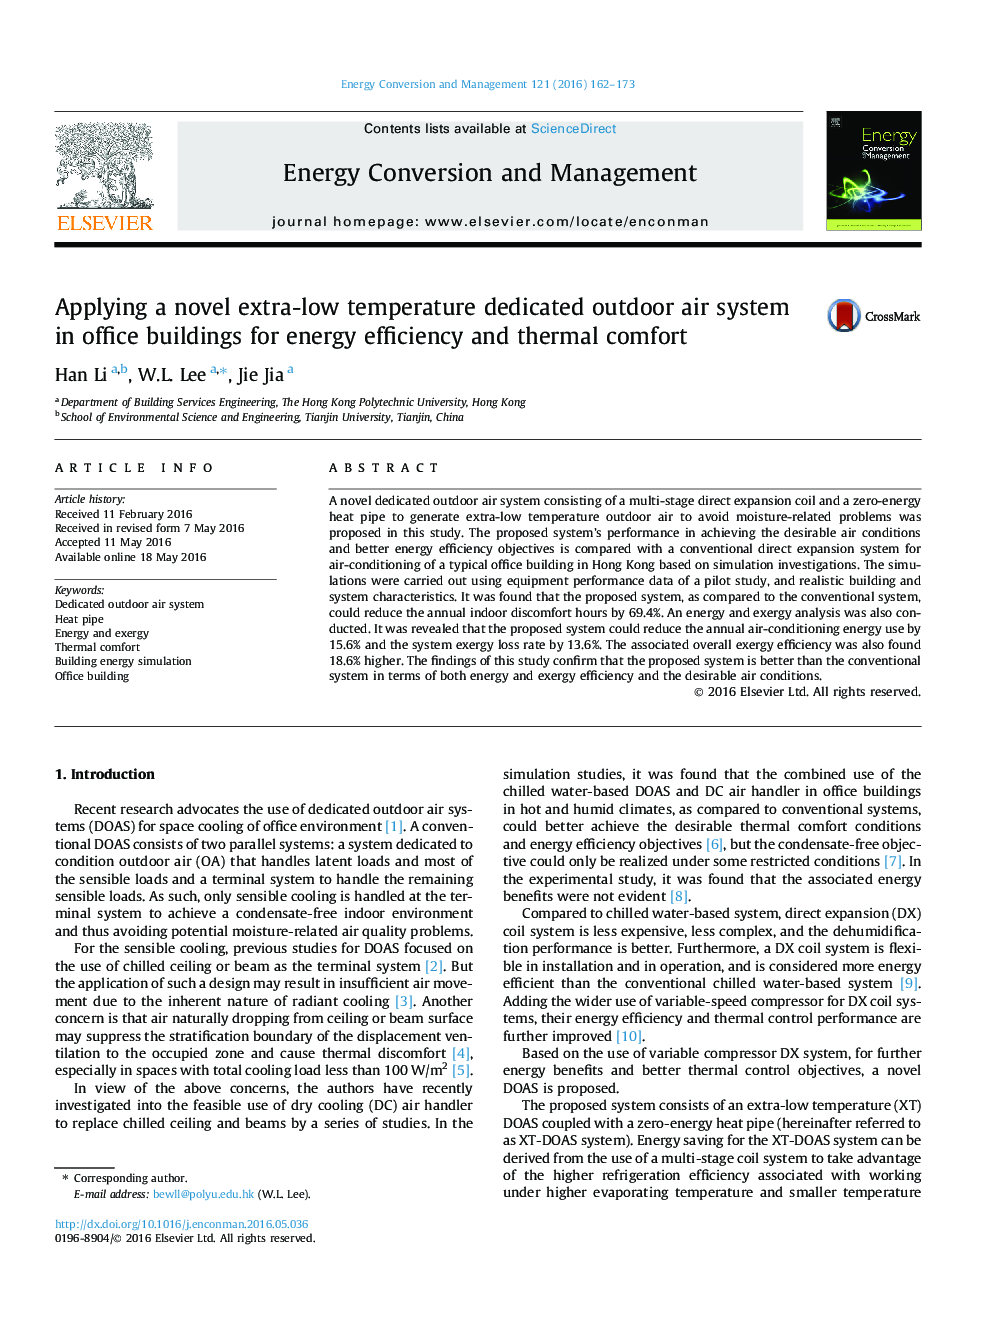 Applying a novel extra-low temperature dedicated outdoor air system in office buildings for energy efficiency and thermal comfort